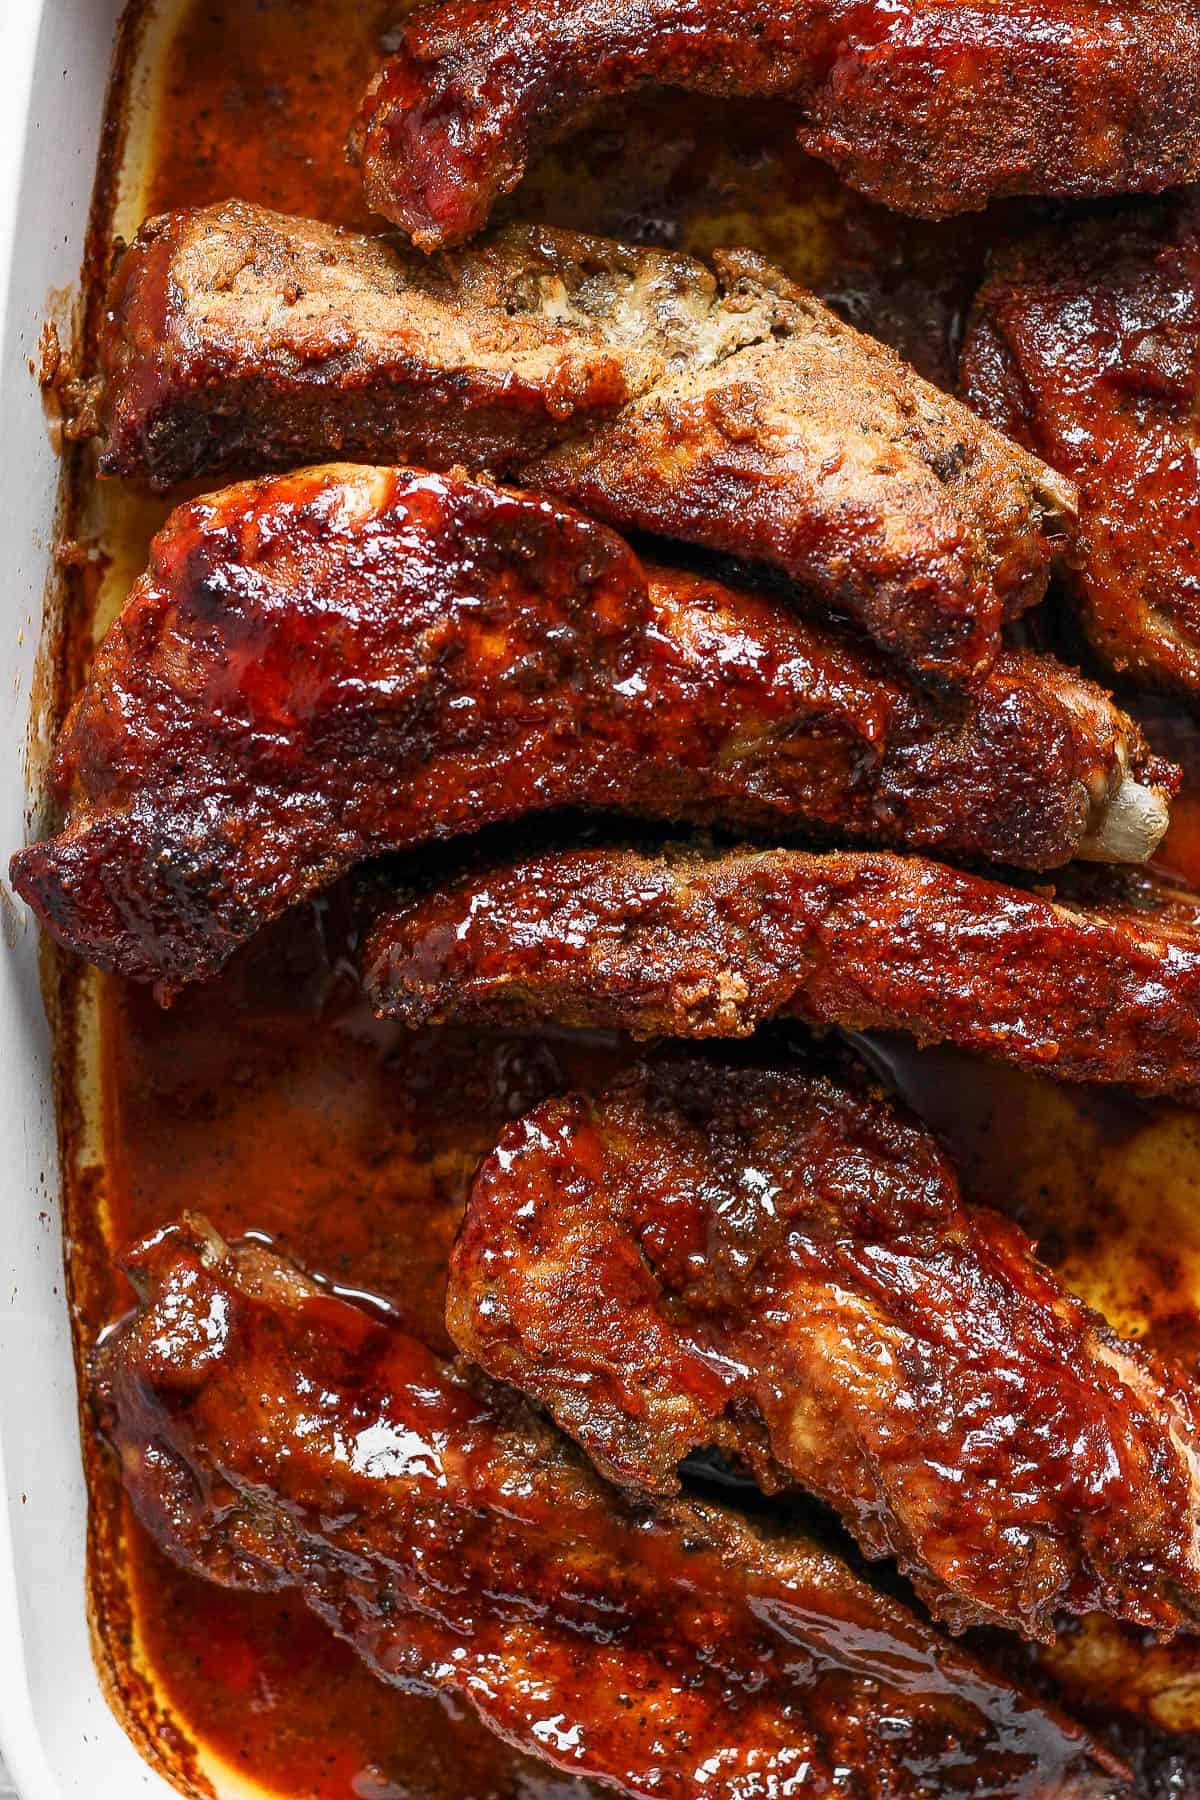 BBQ sauce added to the ribs.